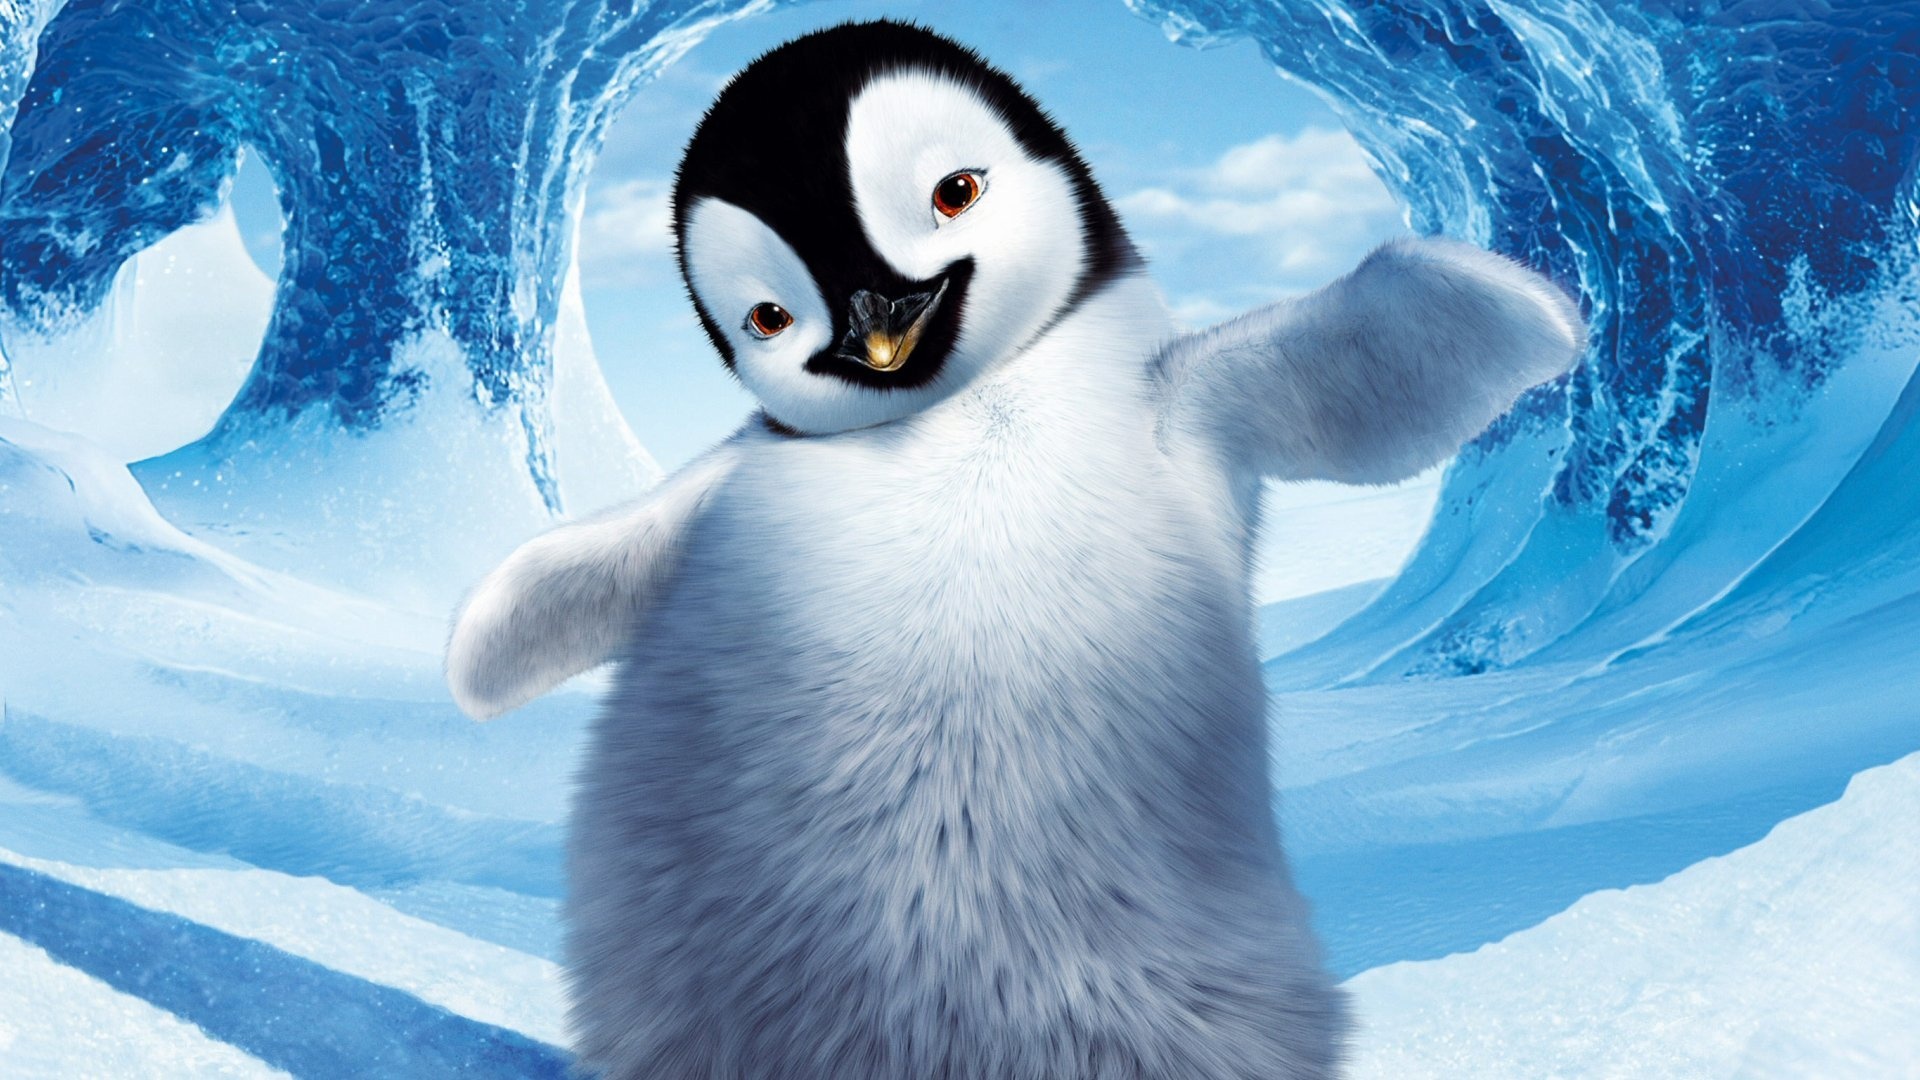 Quotes from Happy Feet, Inspiration quotes, Motivational penguins, 1920x1080 Full HD Desktop